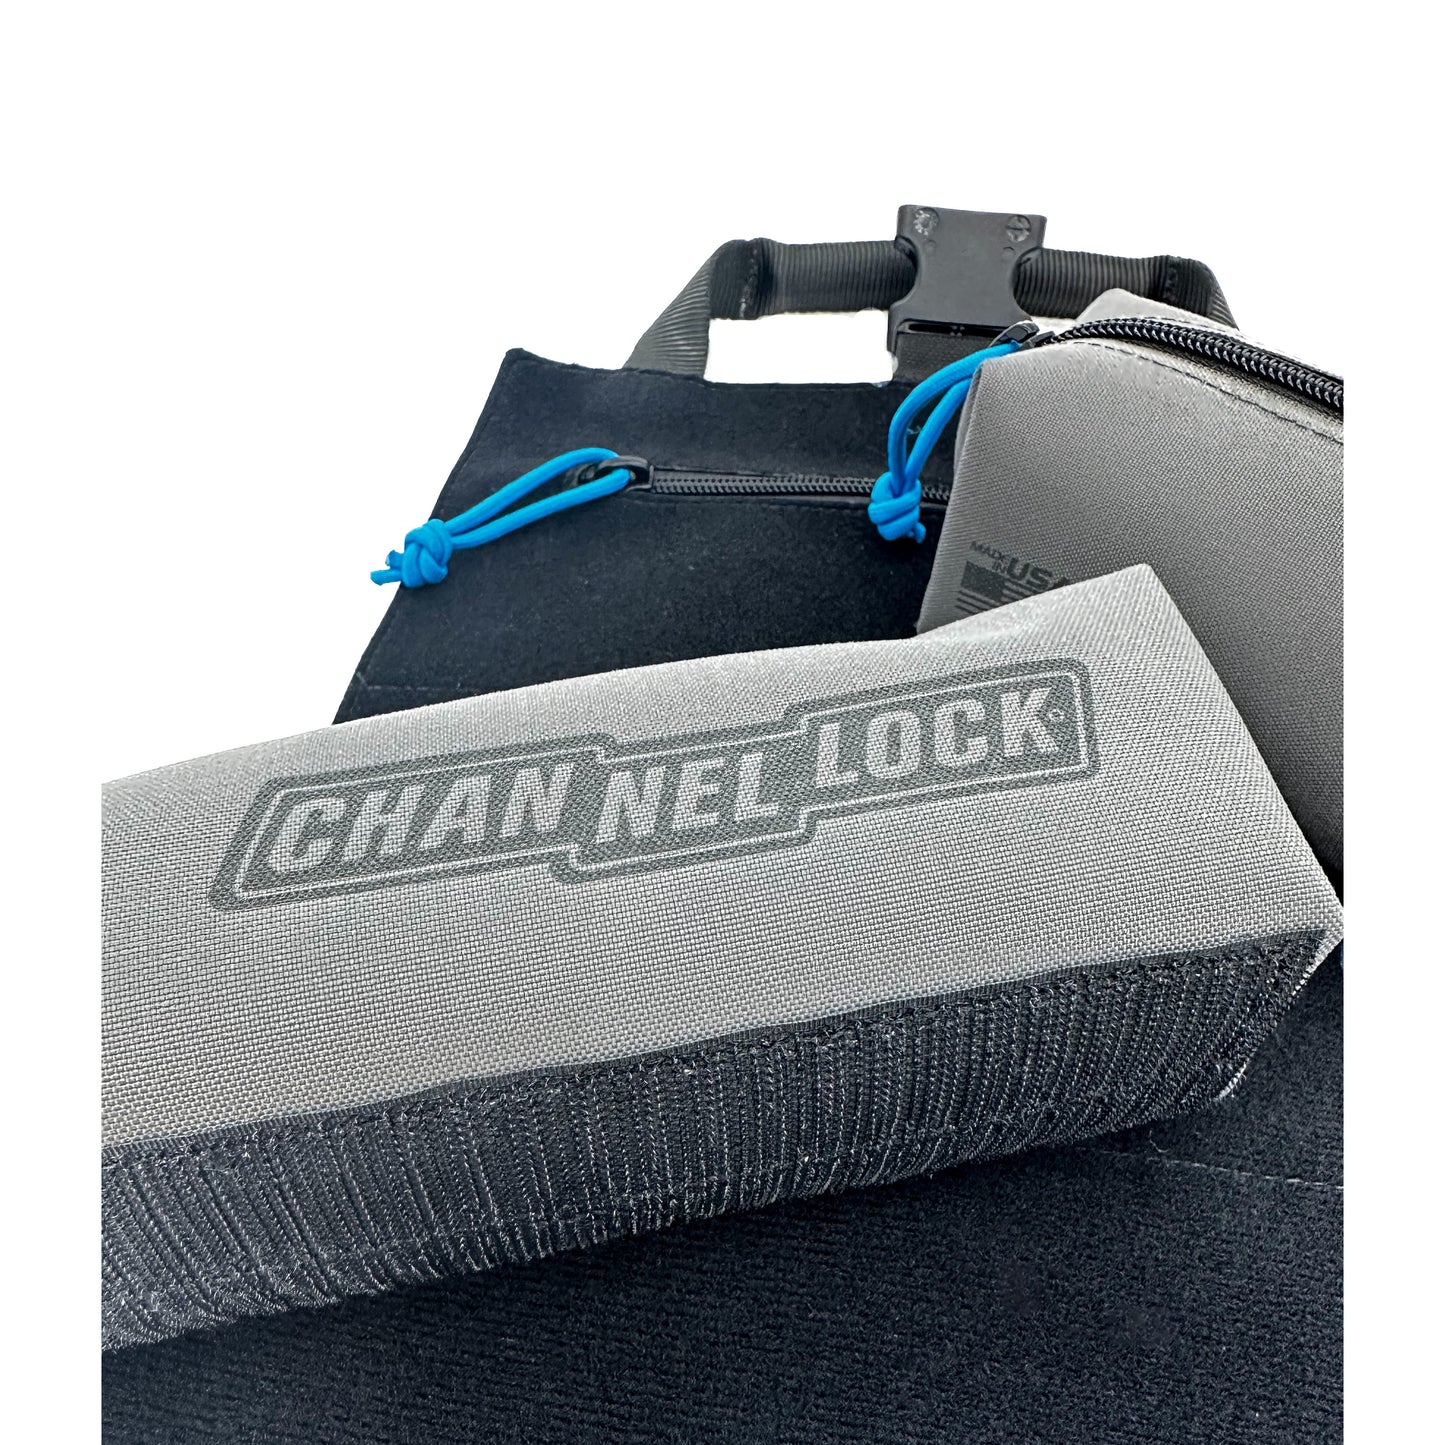 MTR2G CHANNELLOCK® PRO 2-Pouch Modular Tool Roll System with LASERLOCK Fabric™ and 6/12™ Compatible